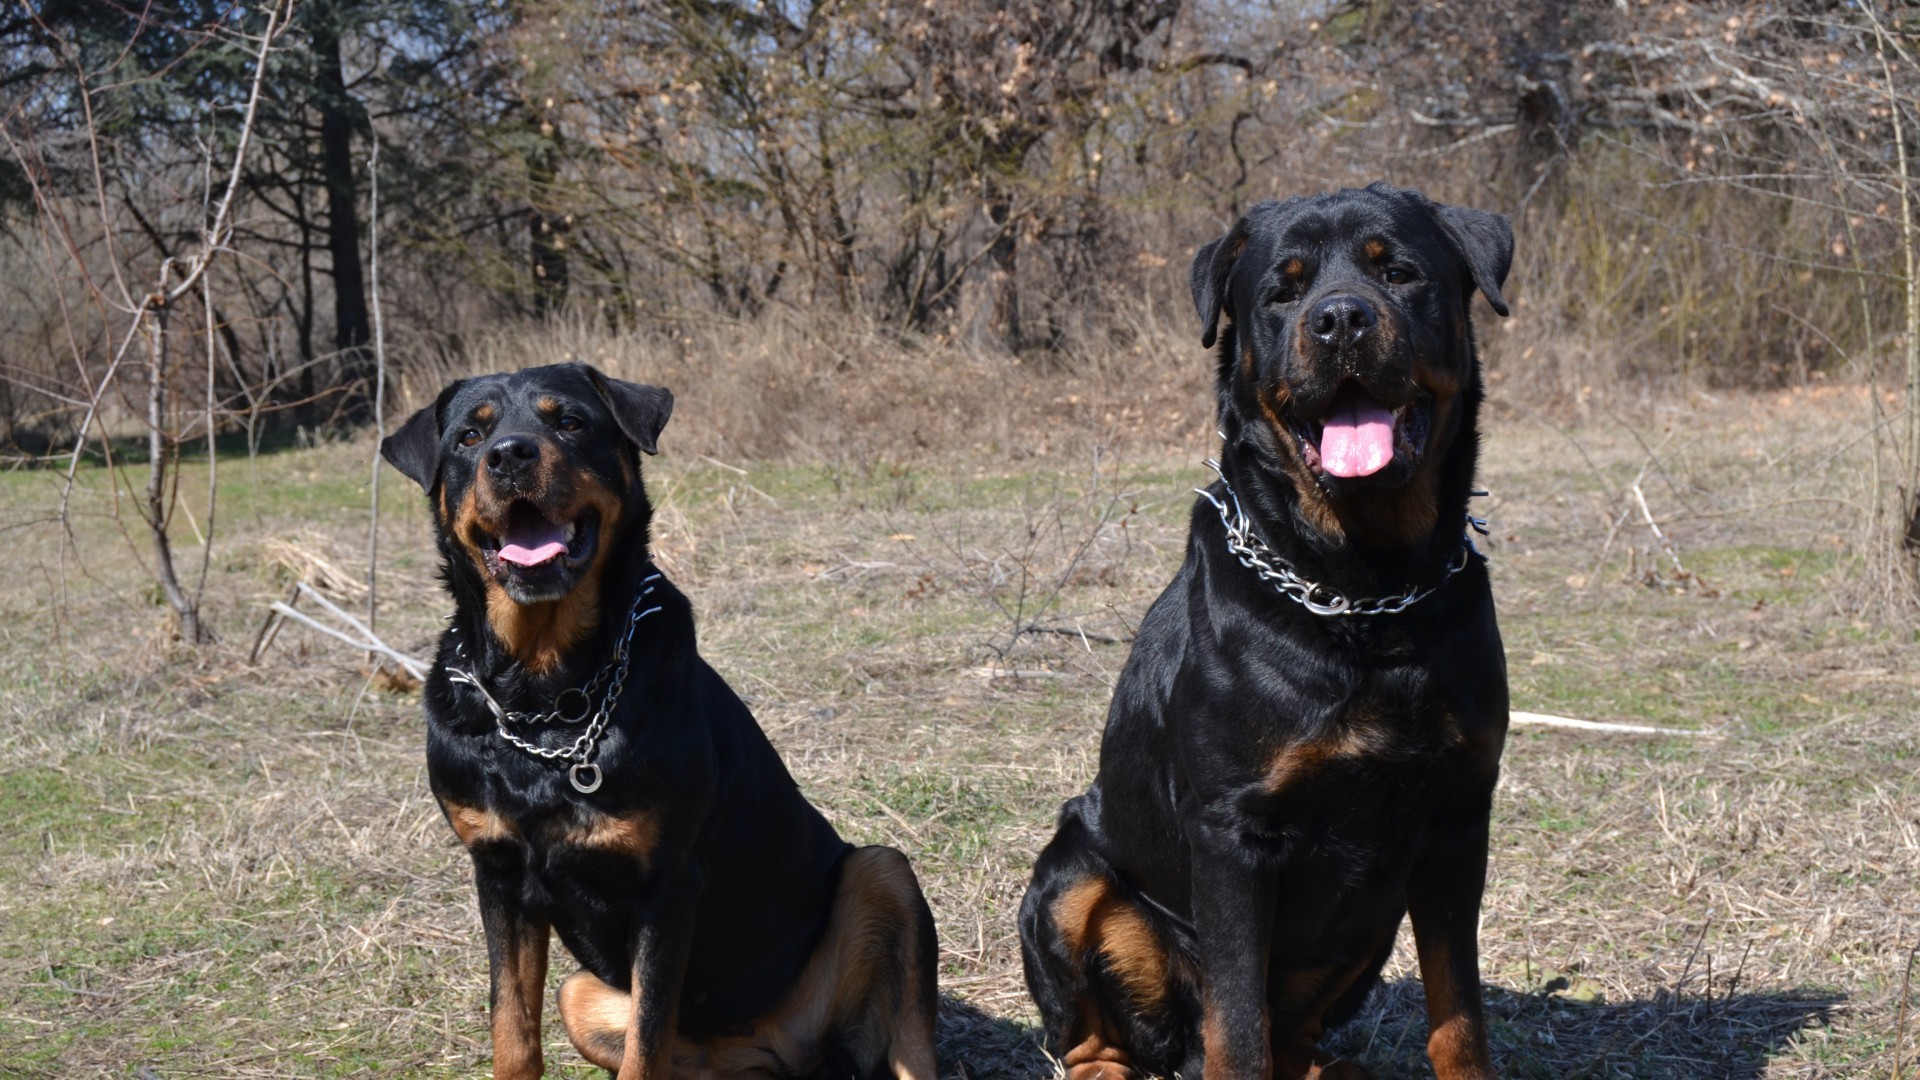 1920x1080 Couple funny Rottweiler wallpapers and images - wallpapers, pictures .